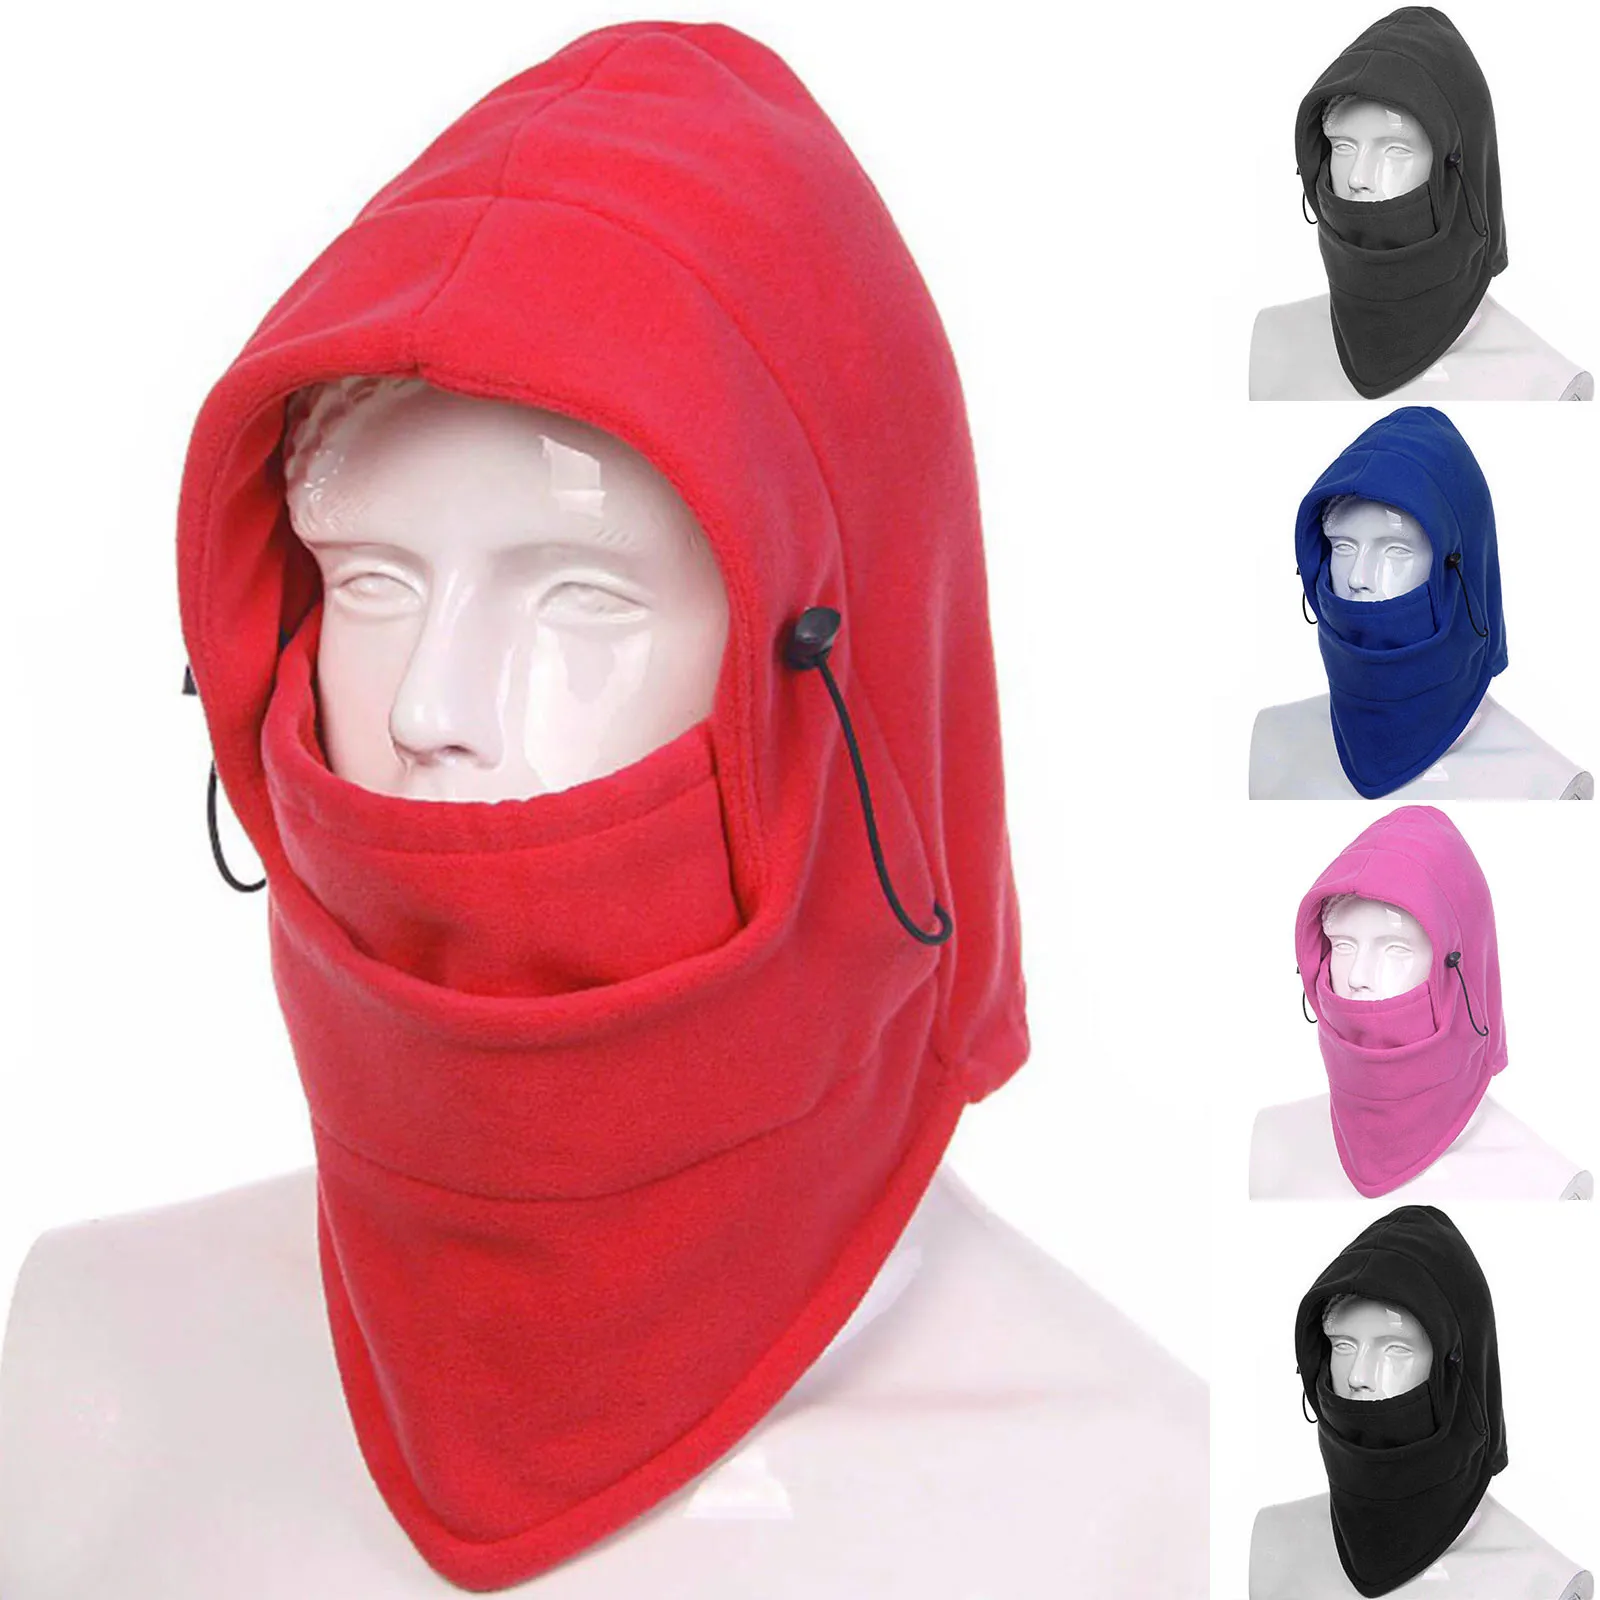 

Winter Hats Ski Mask Fleece Full Face For Outdoor Motorcycle Cycling Skiing, Windproof And Warm korean reviews many clothes-